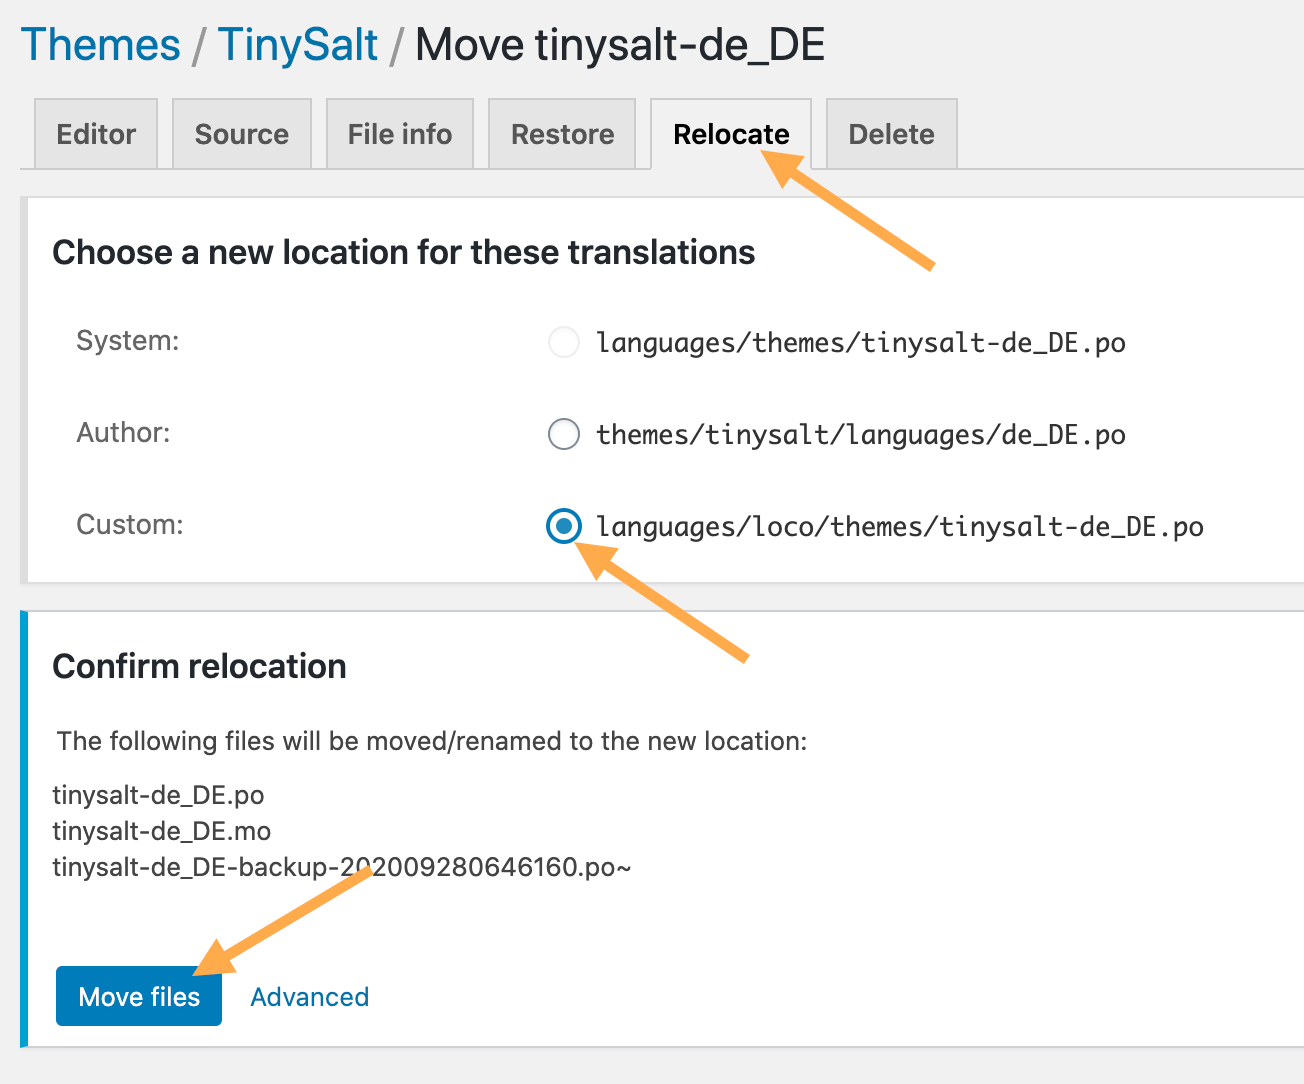 Relocate your translated files.